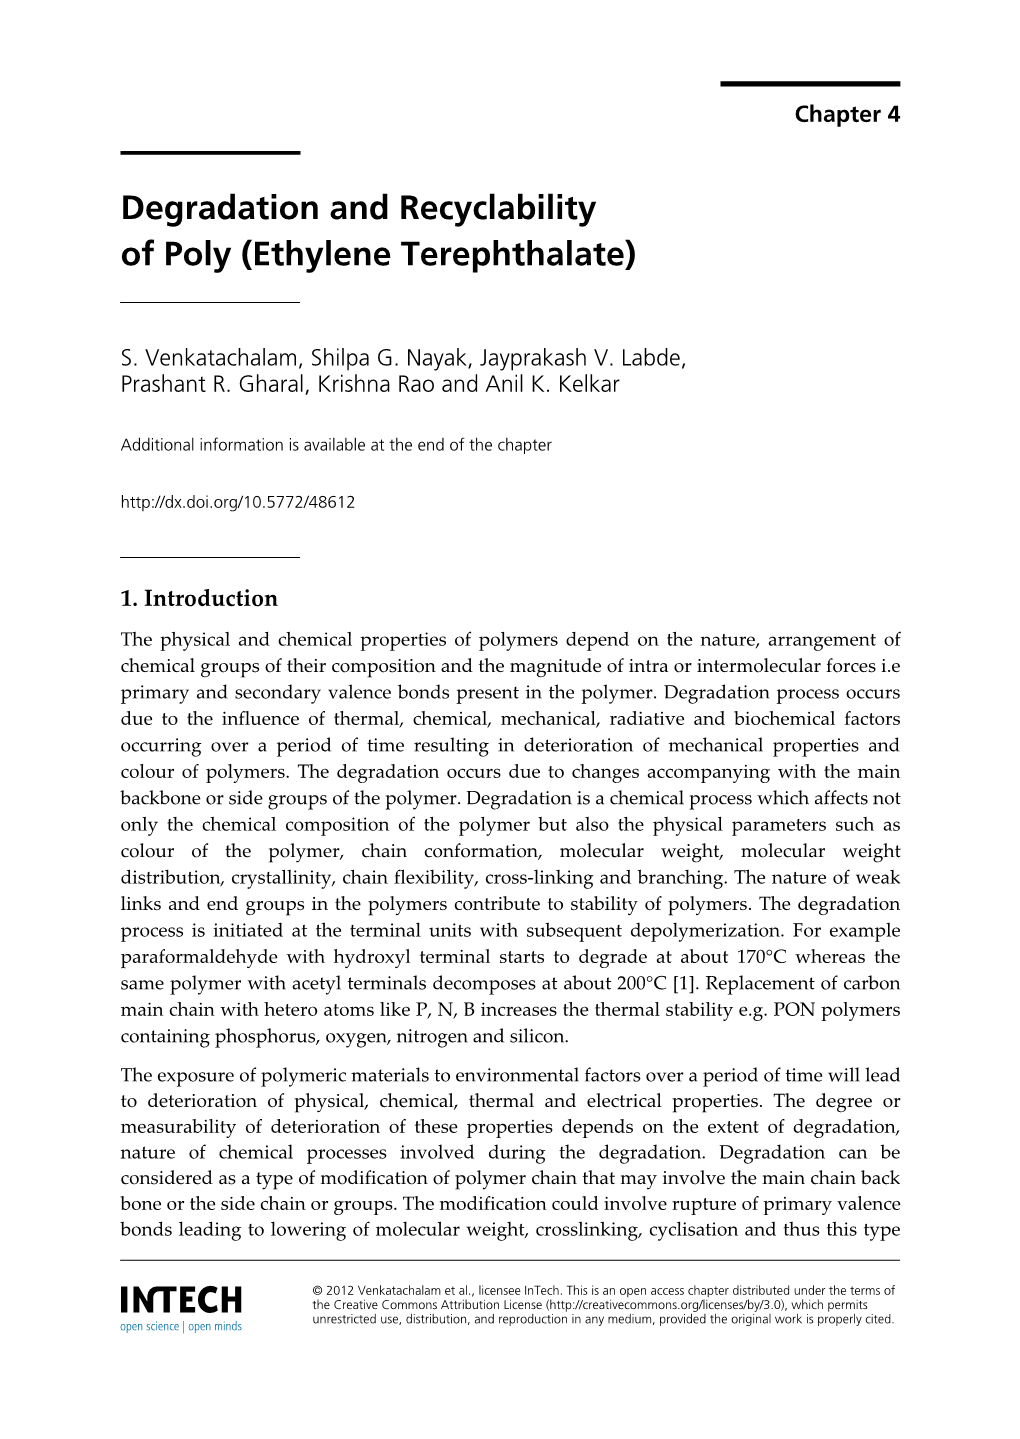 Degradation and Recyclability of Poly (Ethylene Terephthalate)